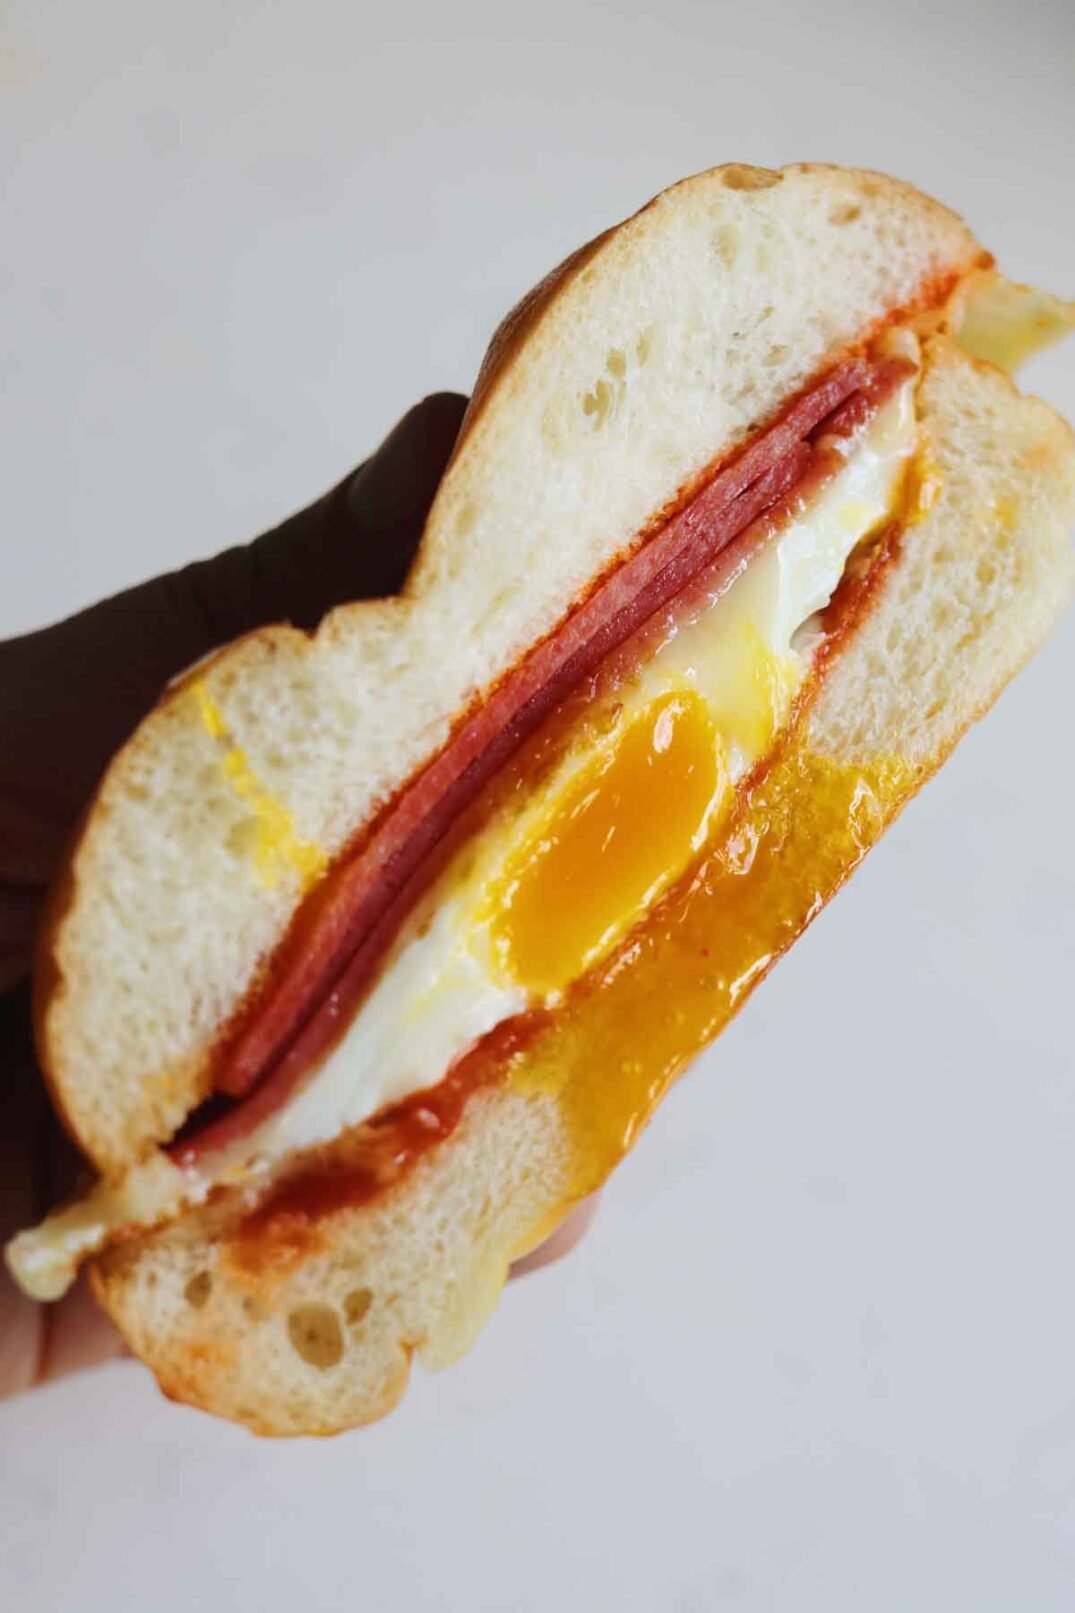 a half of a pork roll egg and cheese sandwich in someone's hand over a white background.